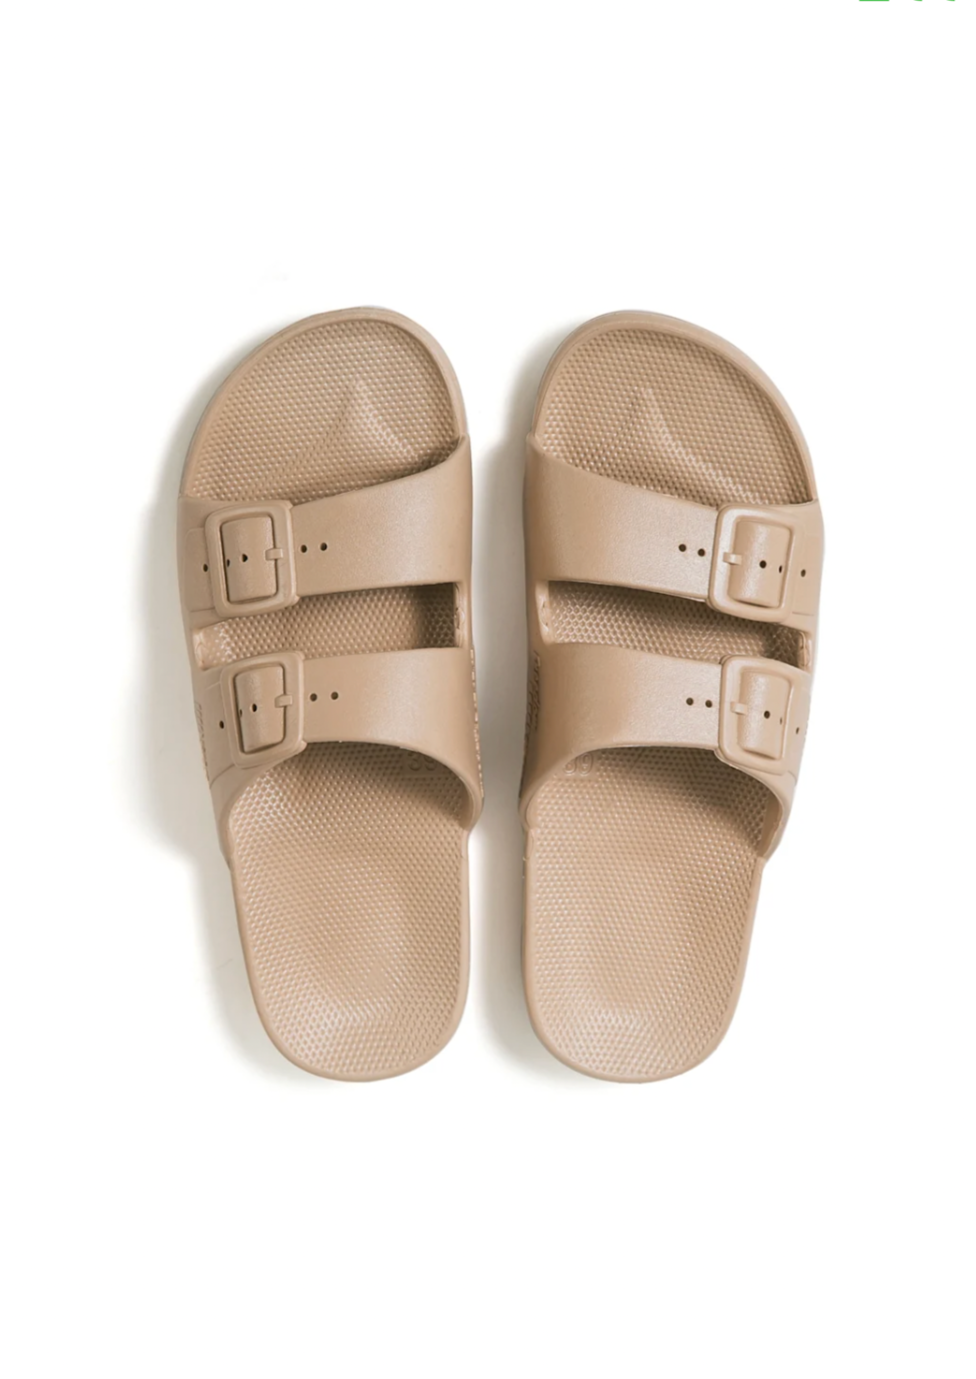 Freedom Moses 'Sands' - Desert Brown Slides We kept only the essentials, for the ultimate comfort.  Our slides are flexible, yet supportive.  Designed to feel like a hug for your feet